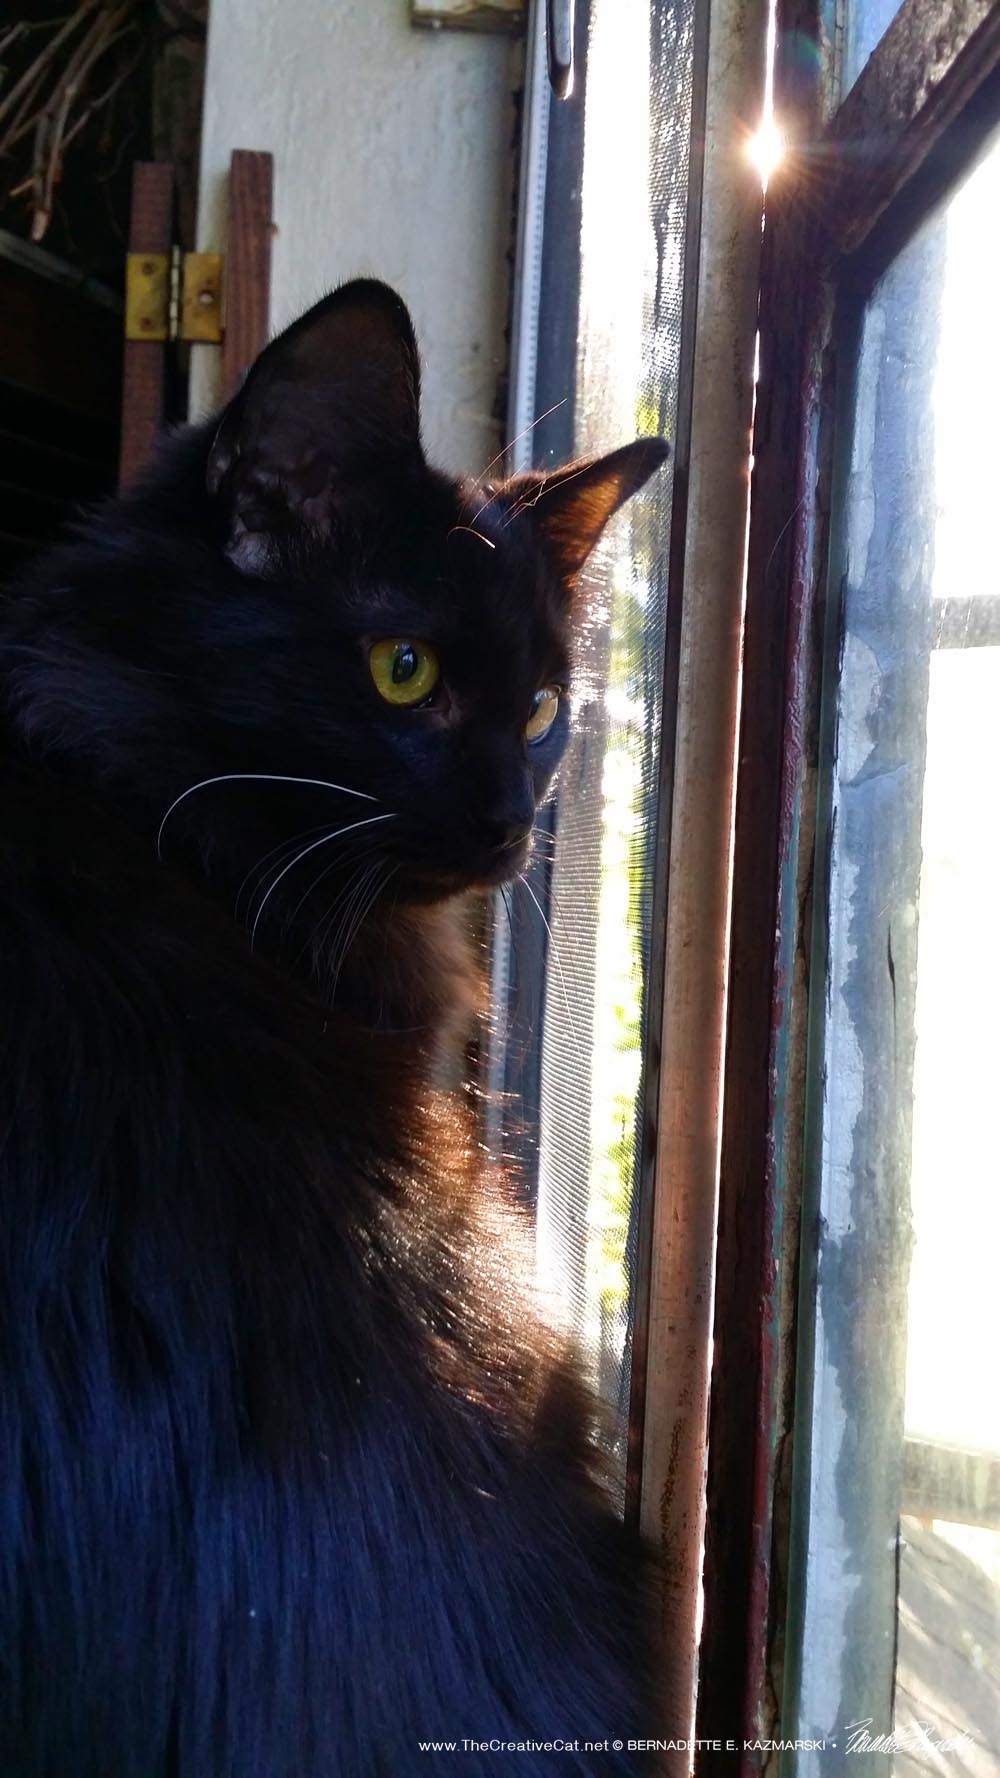 Alvina watching out the window in warm sunlight, one of her favorite things to do.